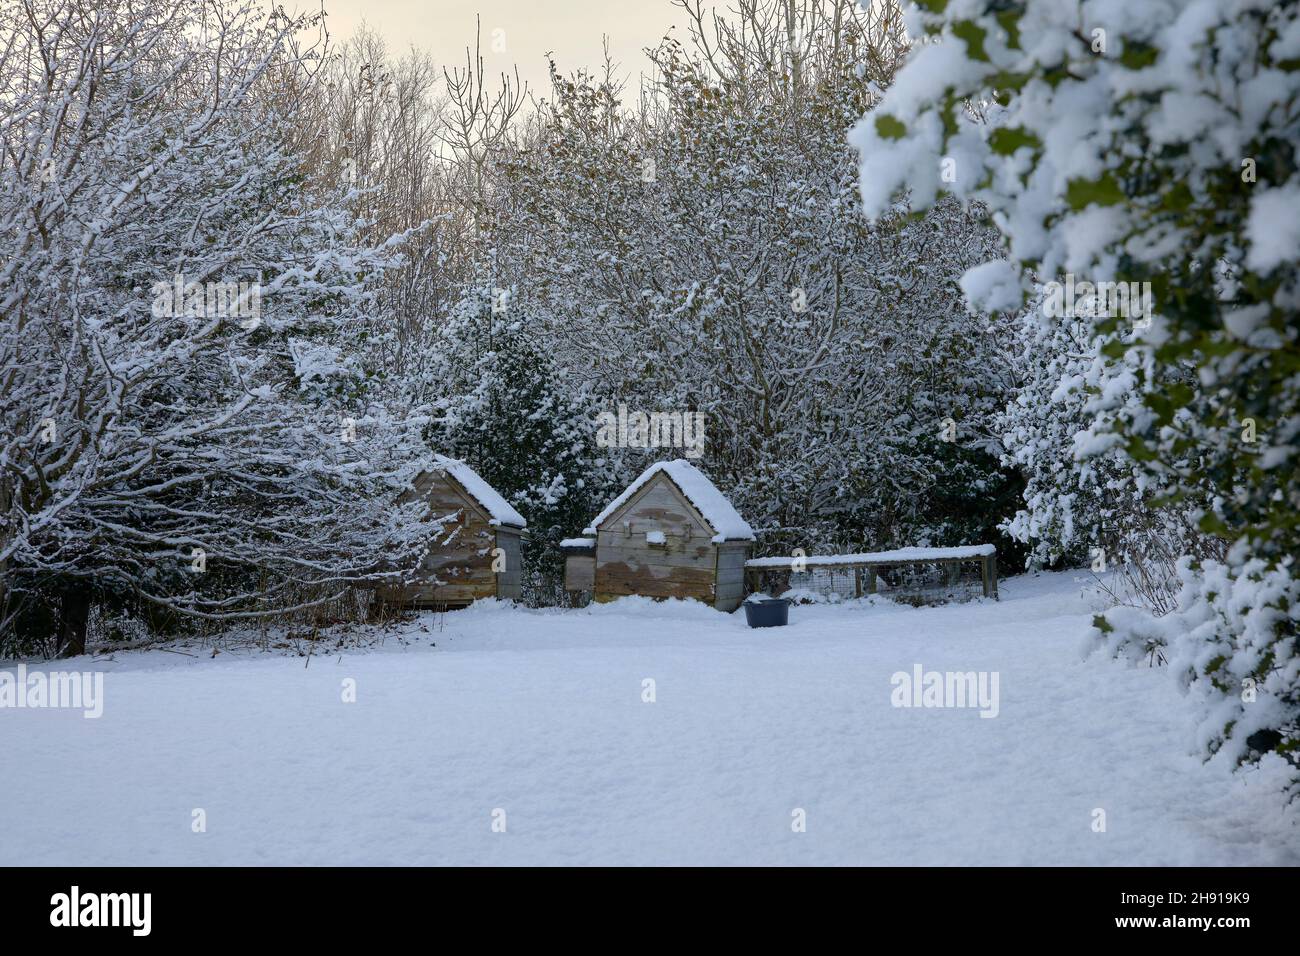 Snow covered chicken houses in a moorland woodland setting. Stock Photo